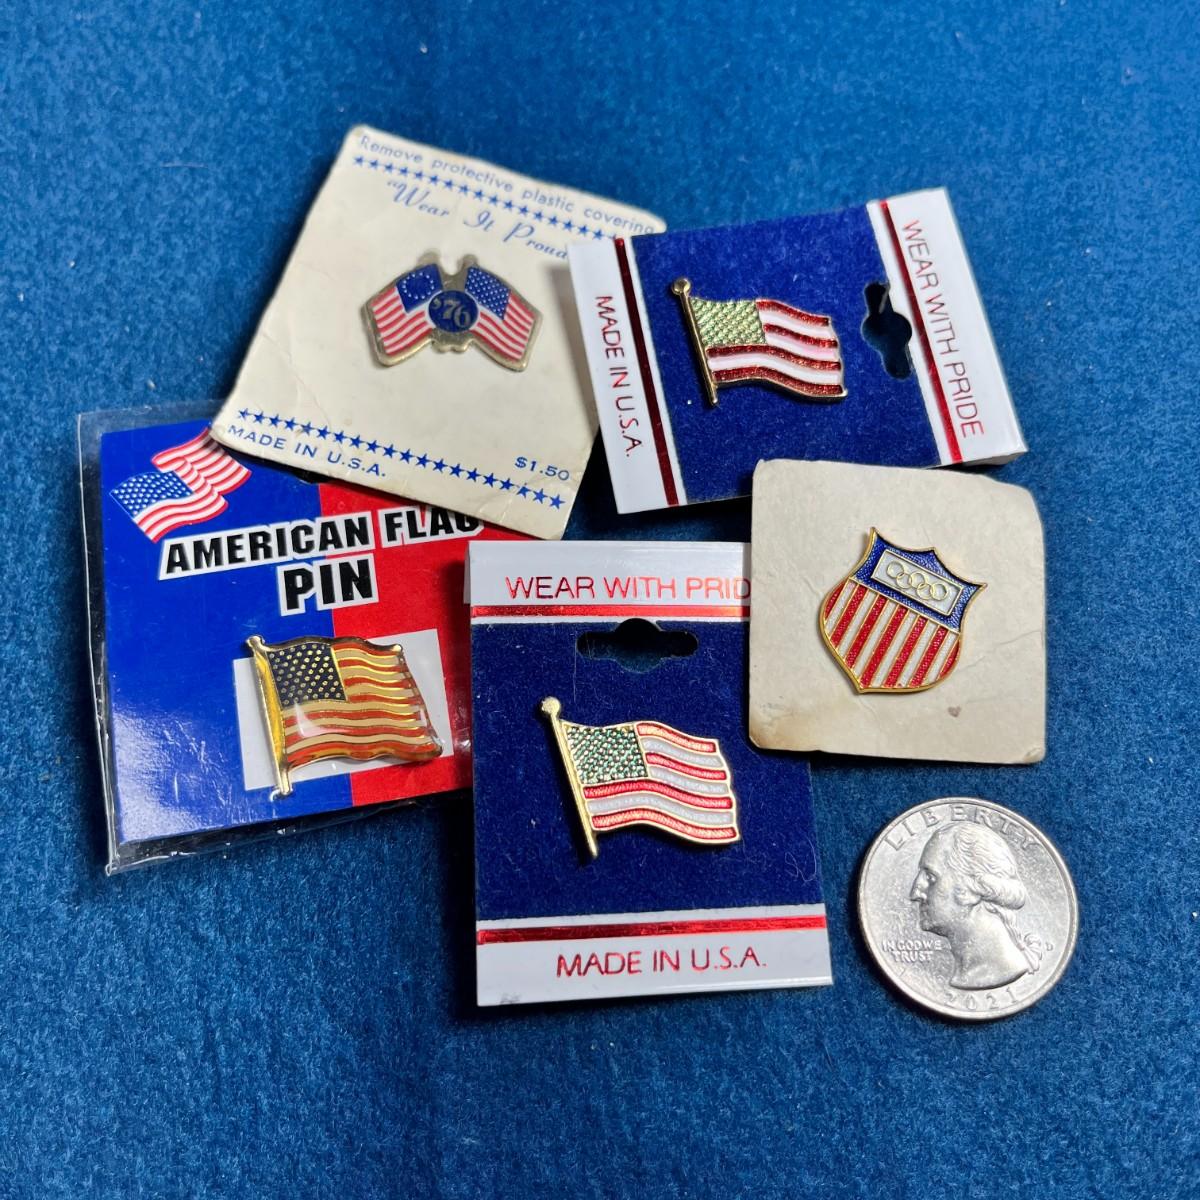 Pin on USA Proud to Wear!!